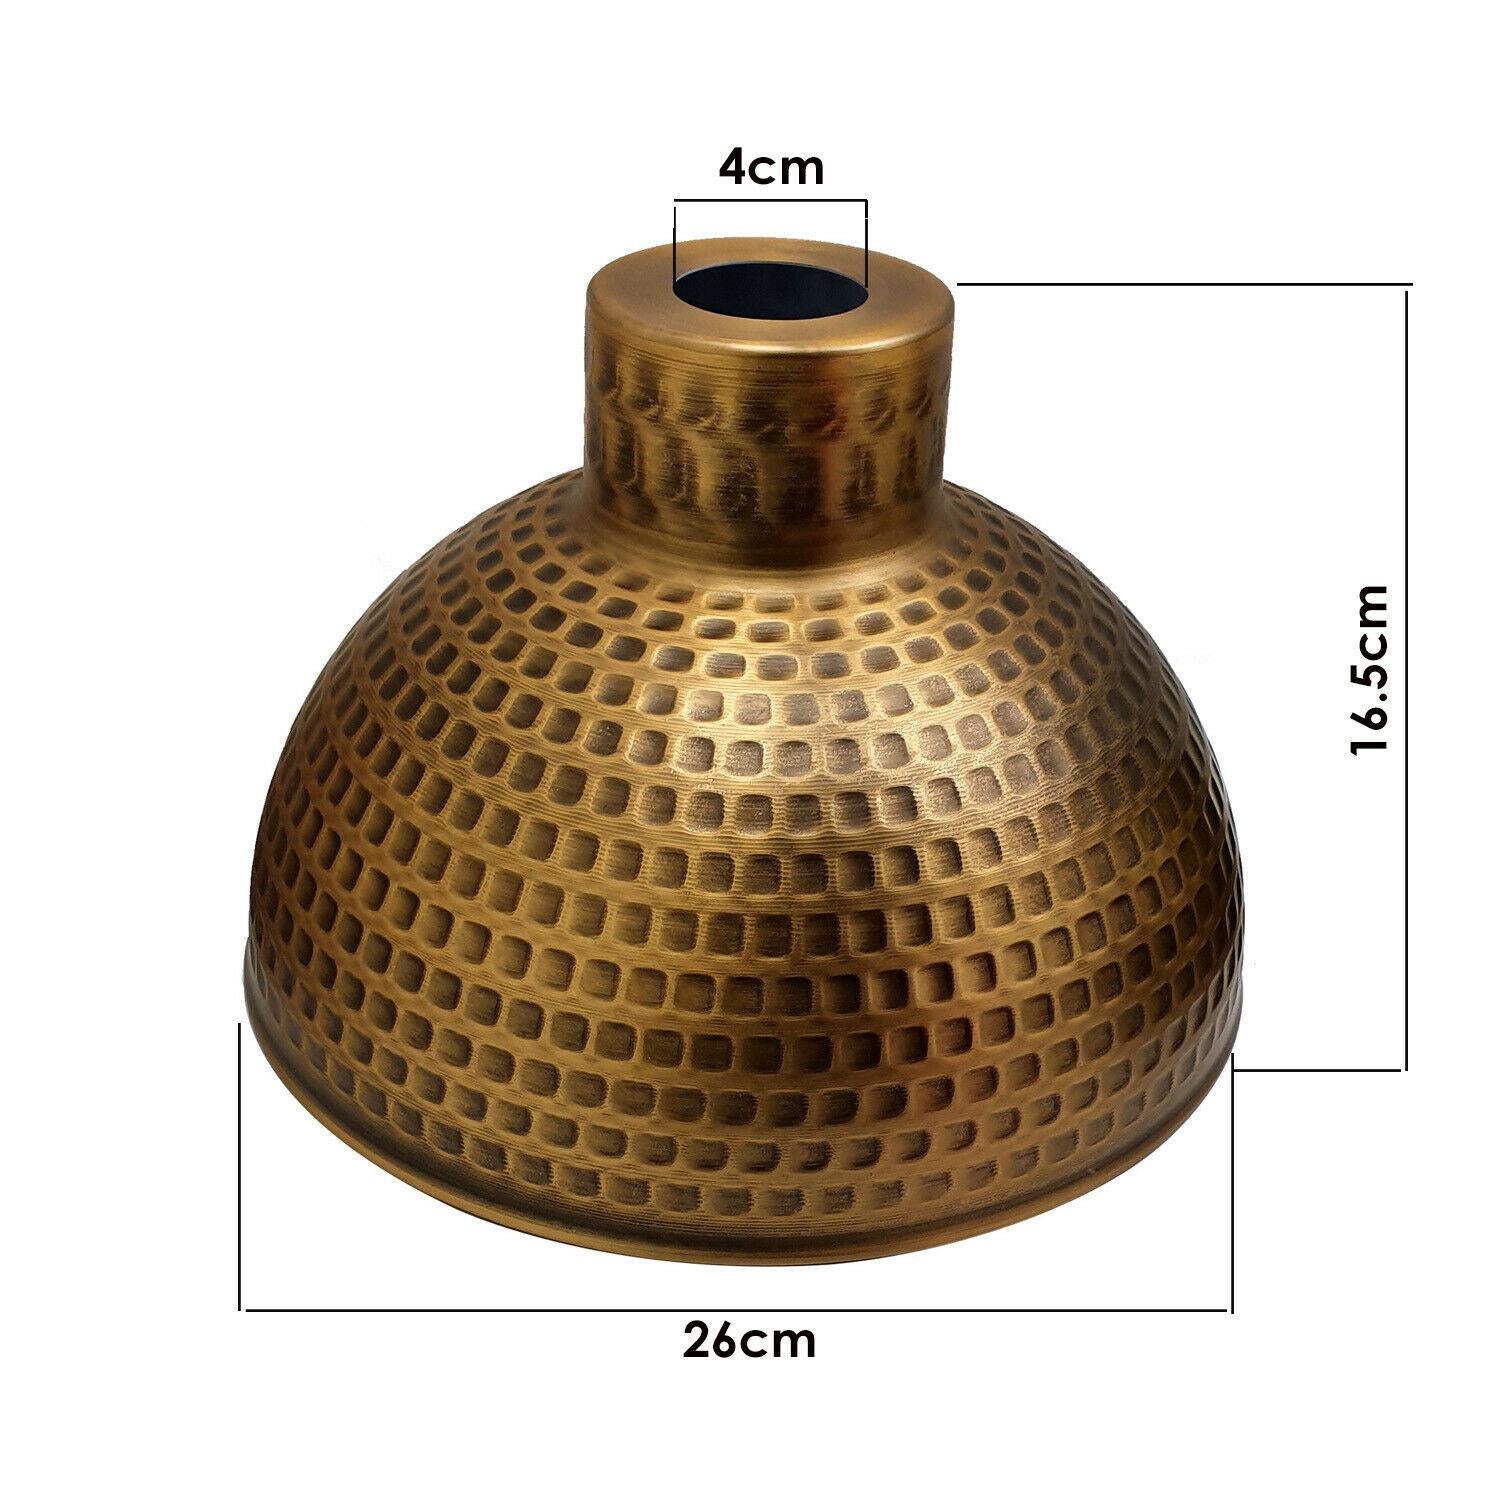 easy fit dome lamp shade - Size image